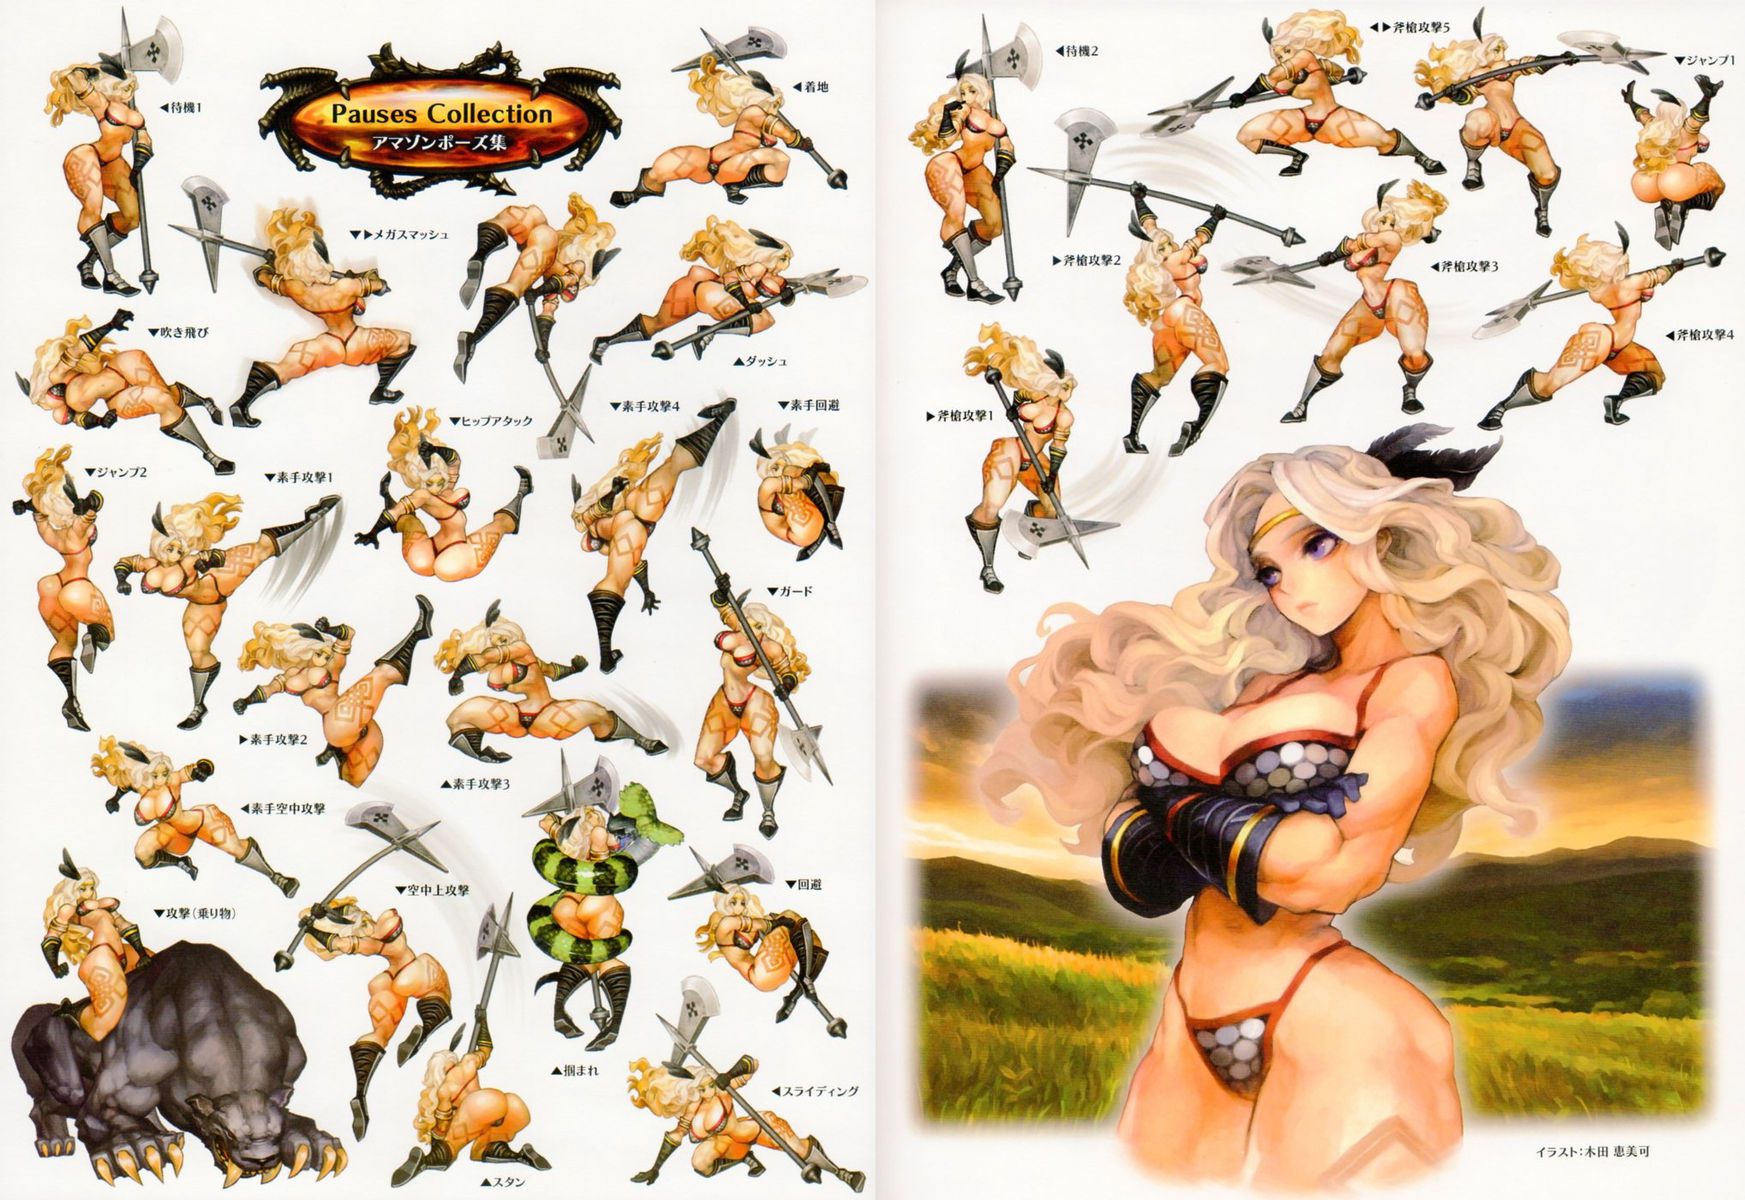 Dragons crown or Odin sphere or vanilla ware game Pierrot cute 24